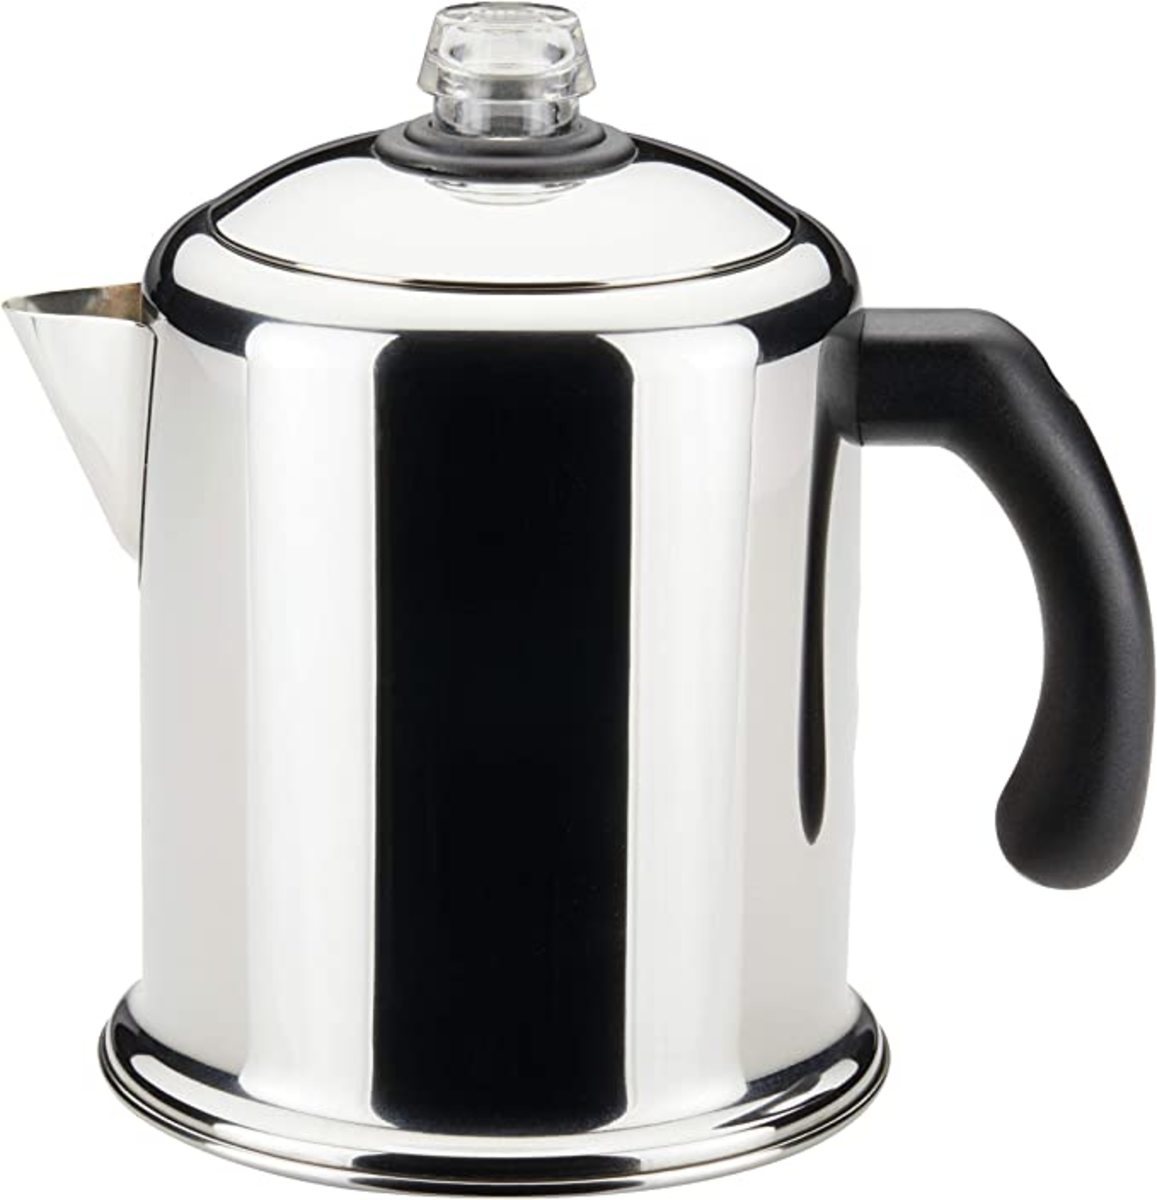 The Farberware 50124 Classic Yosemite Stainless Steel Coffee Percolator. For my advantages and disadvantages of percolators, please read on...